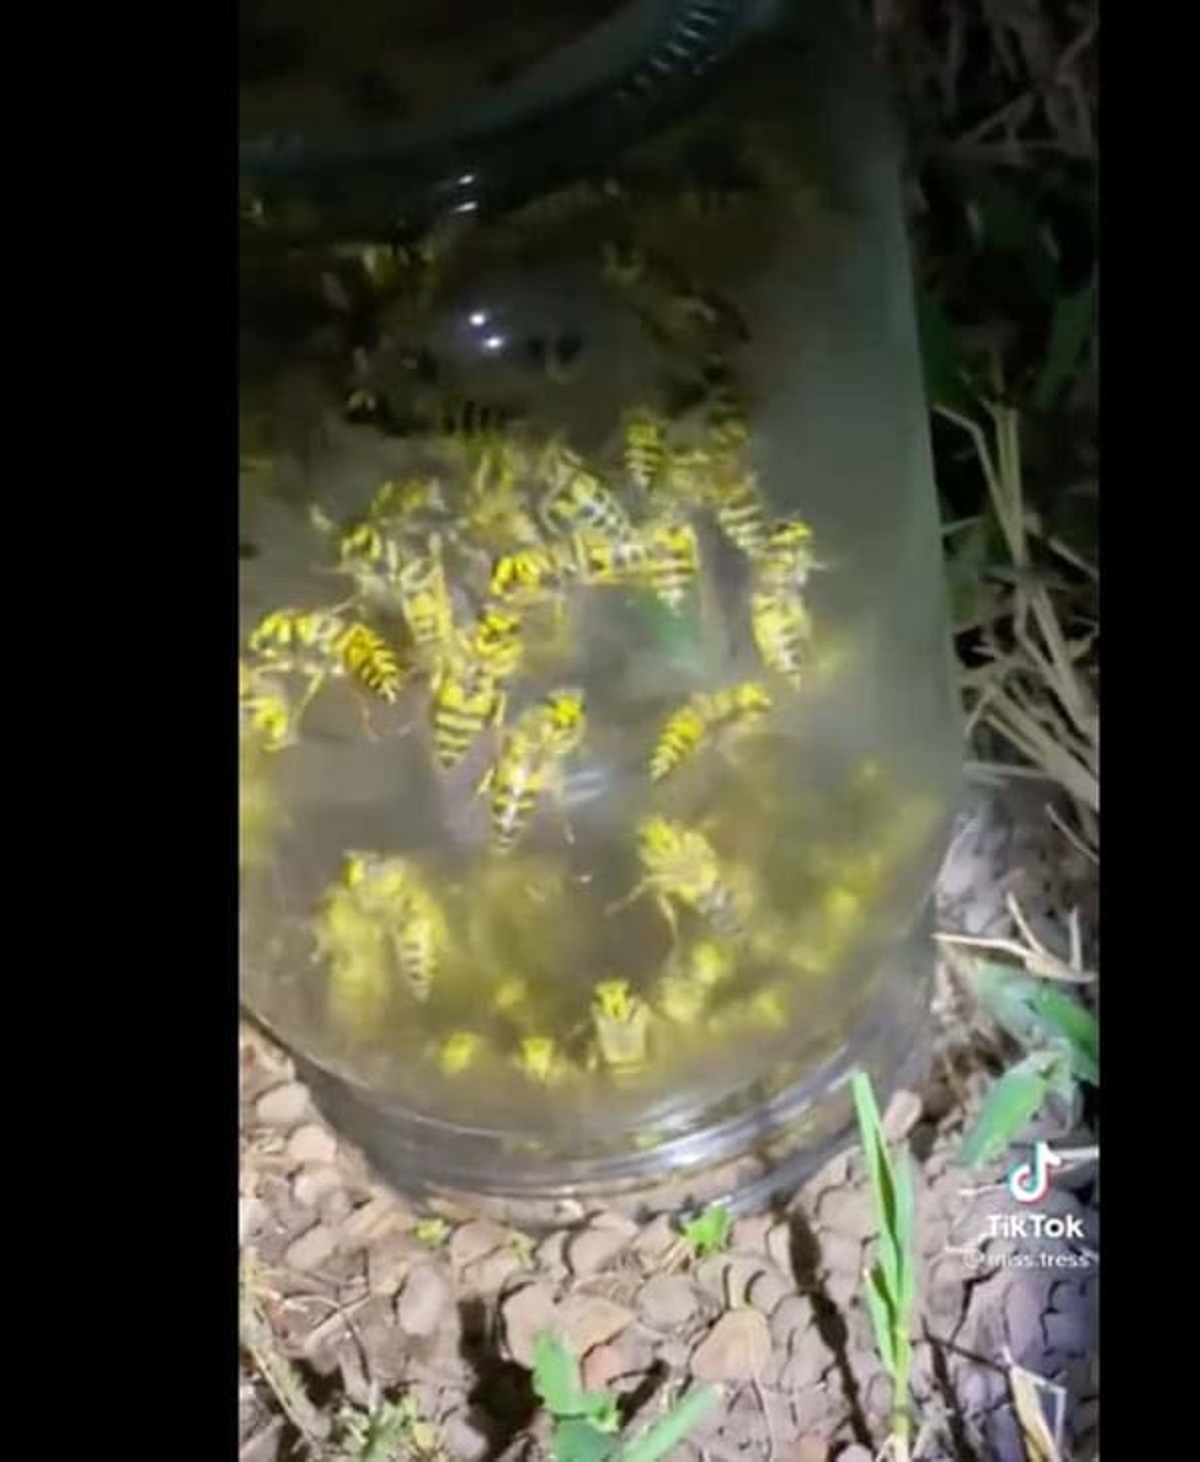 “Putting a jar over a yellow jacket nest”